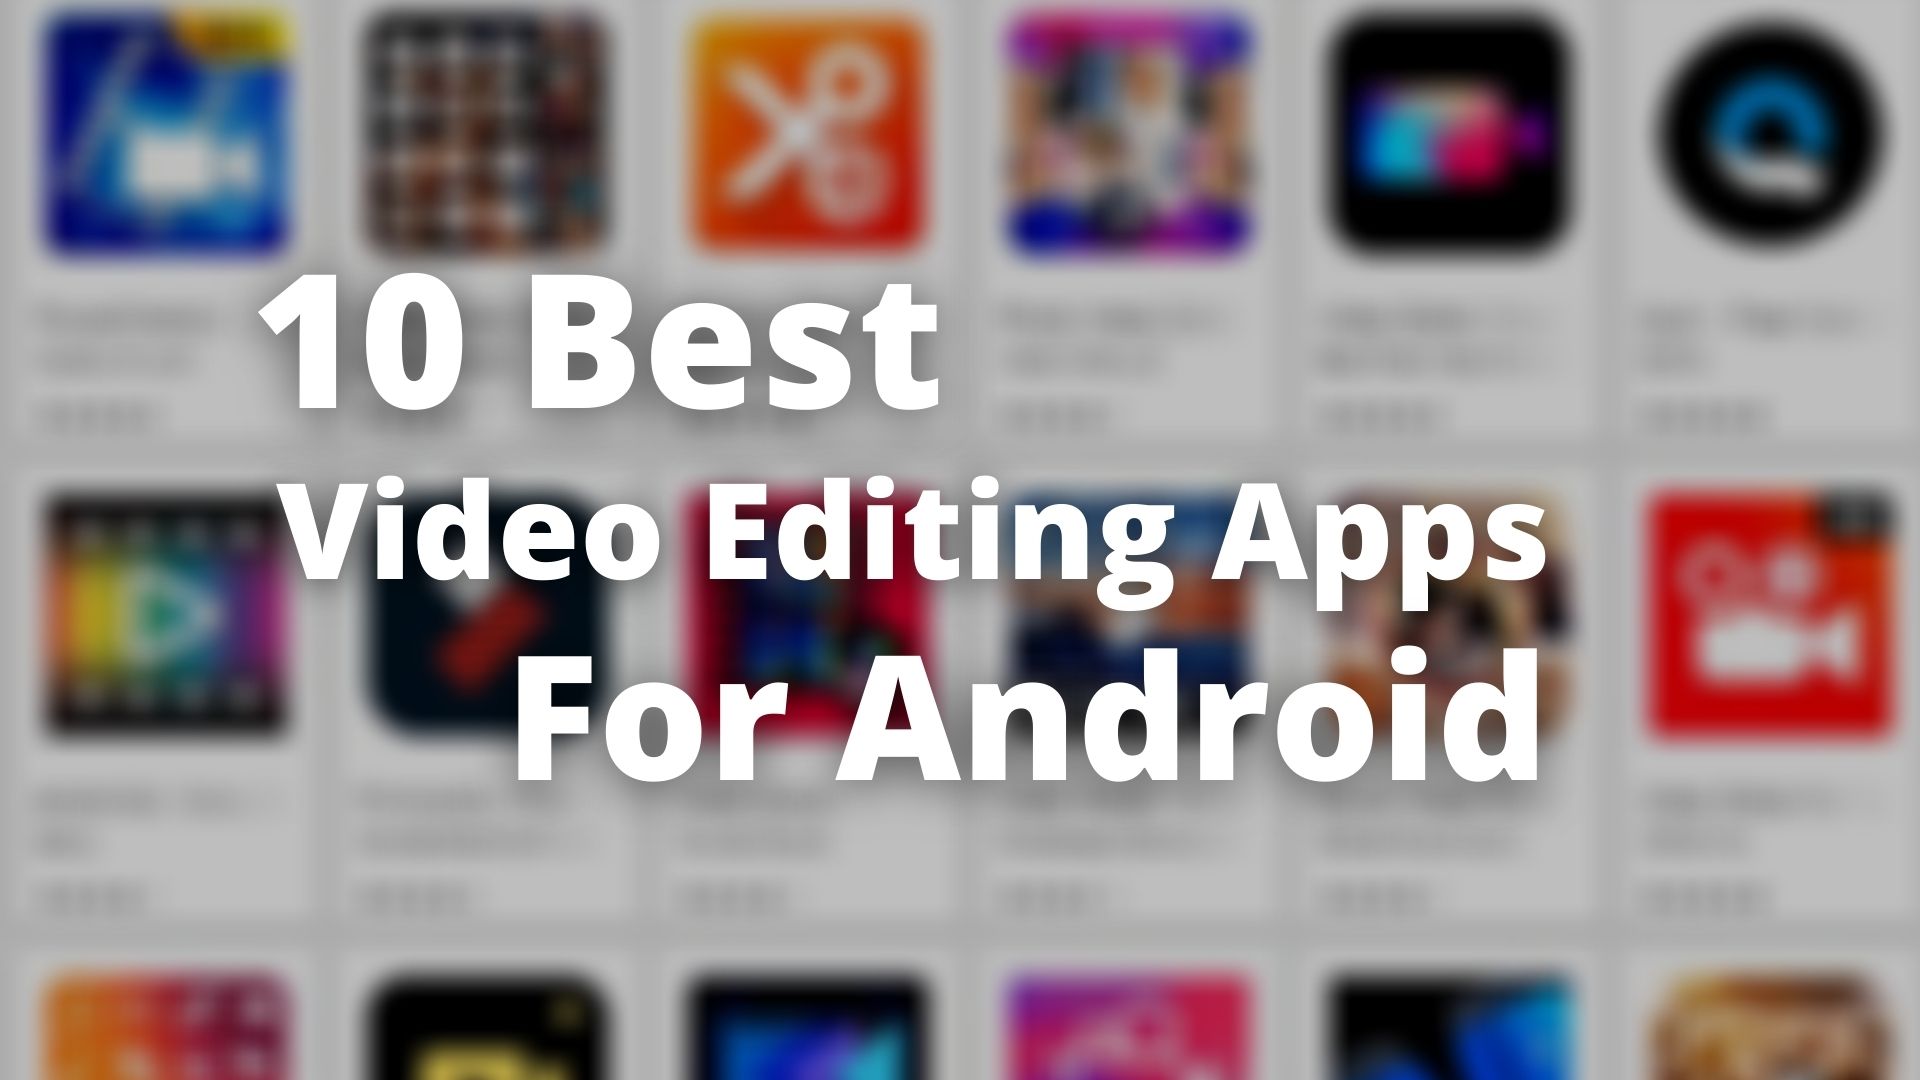 best android video editing apps